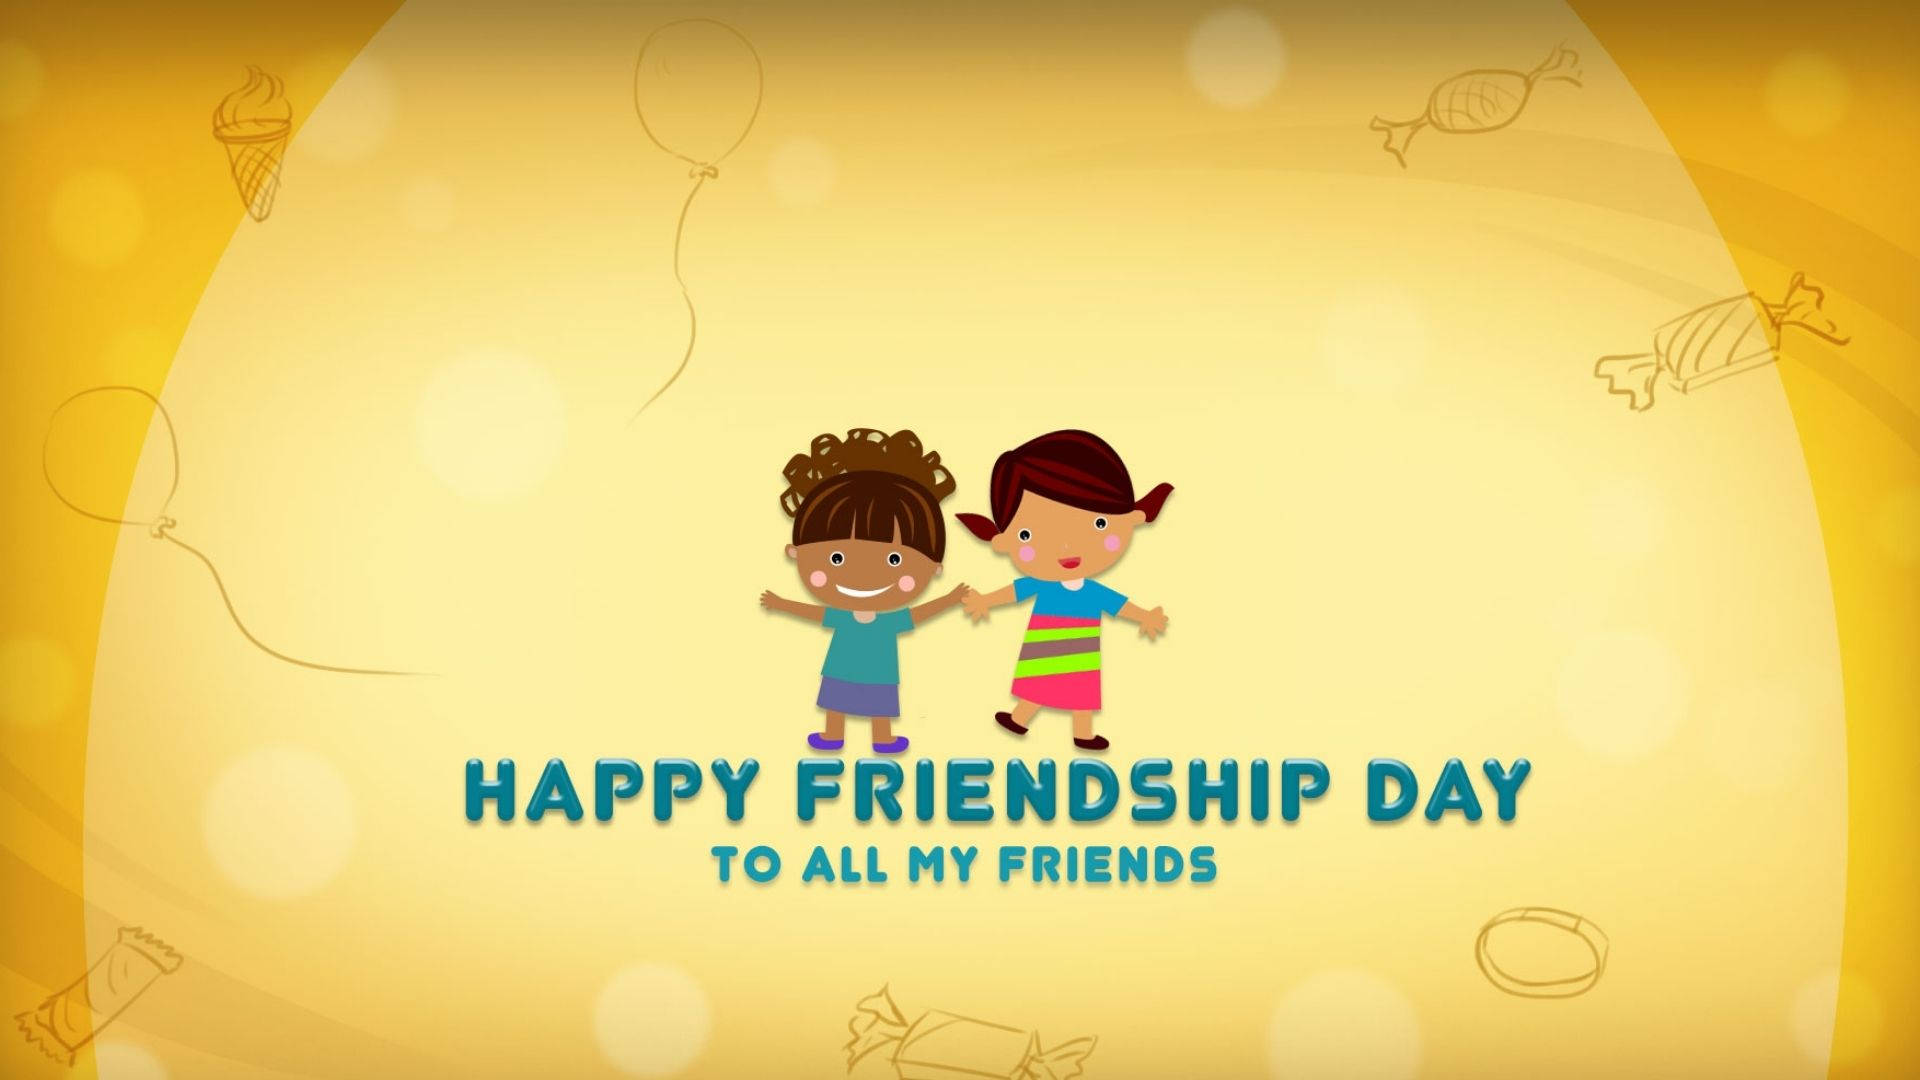 Friends For Friendship Day Wallpaper